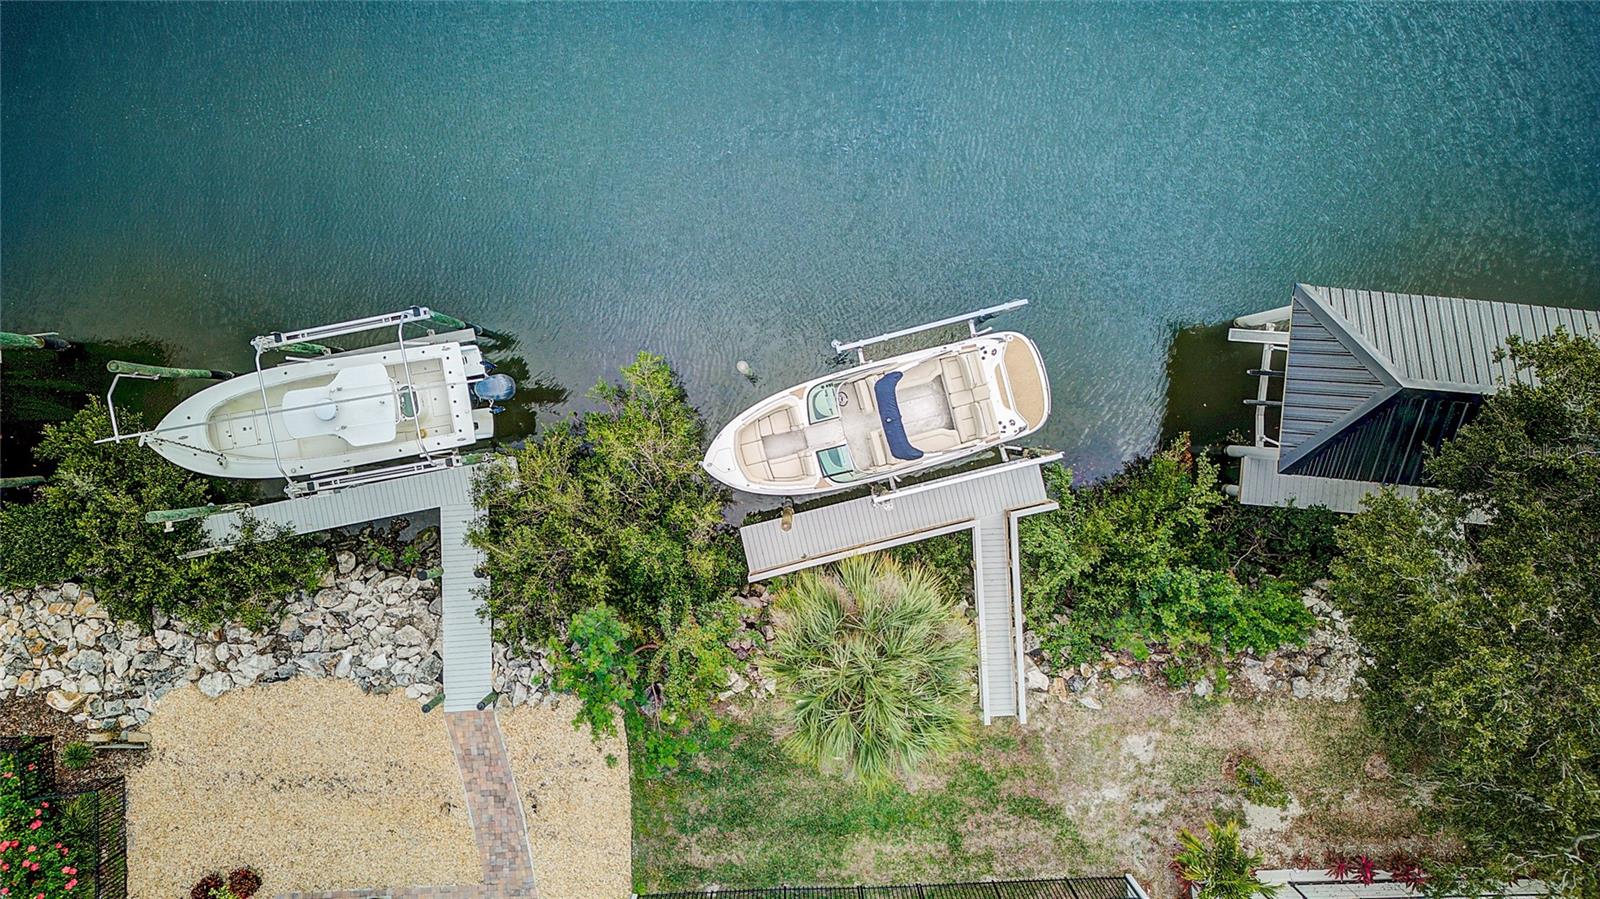 AERIAL VIEW OVER DOCK